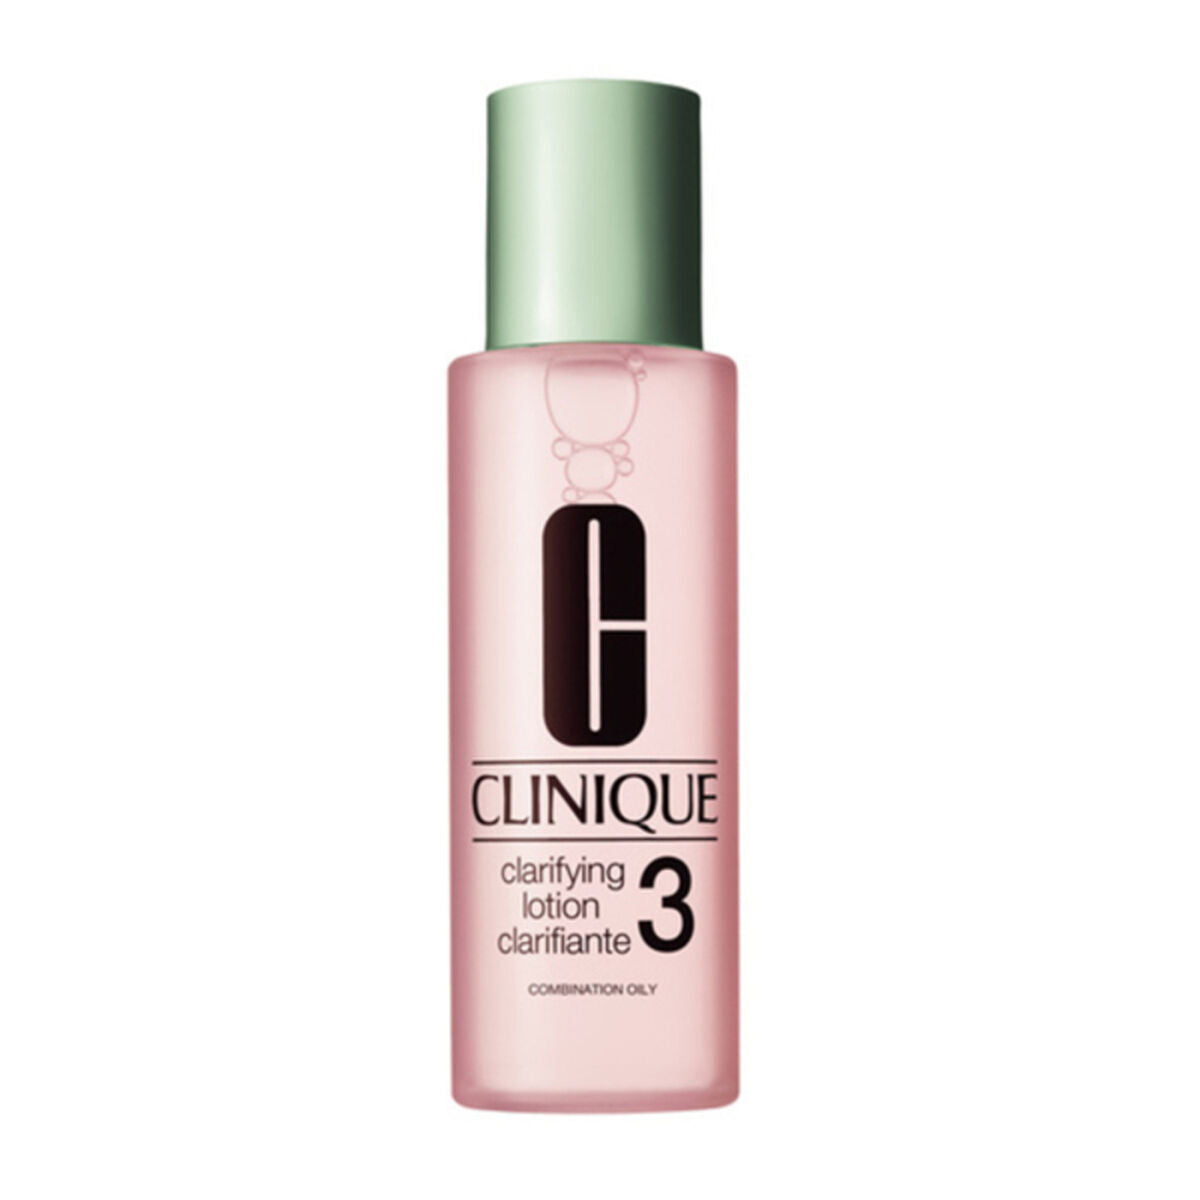 Toning Lotion Clarifying Clinique Oily skin-1